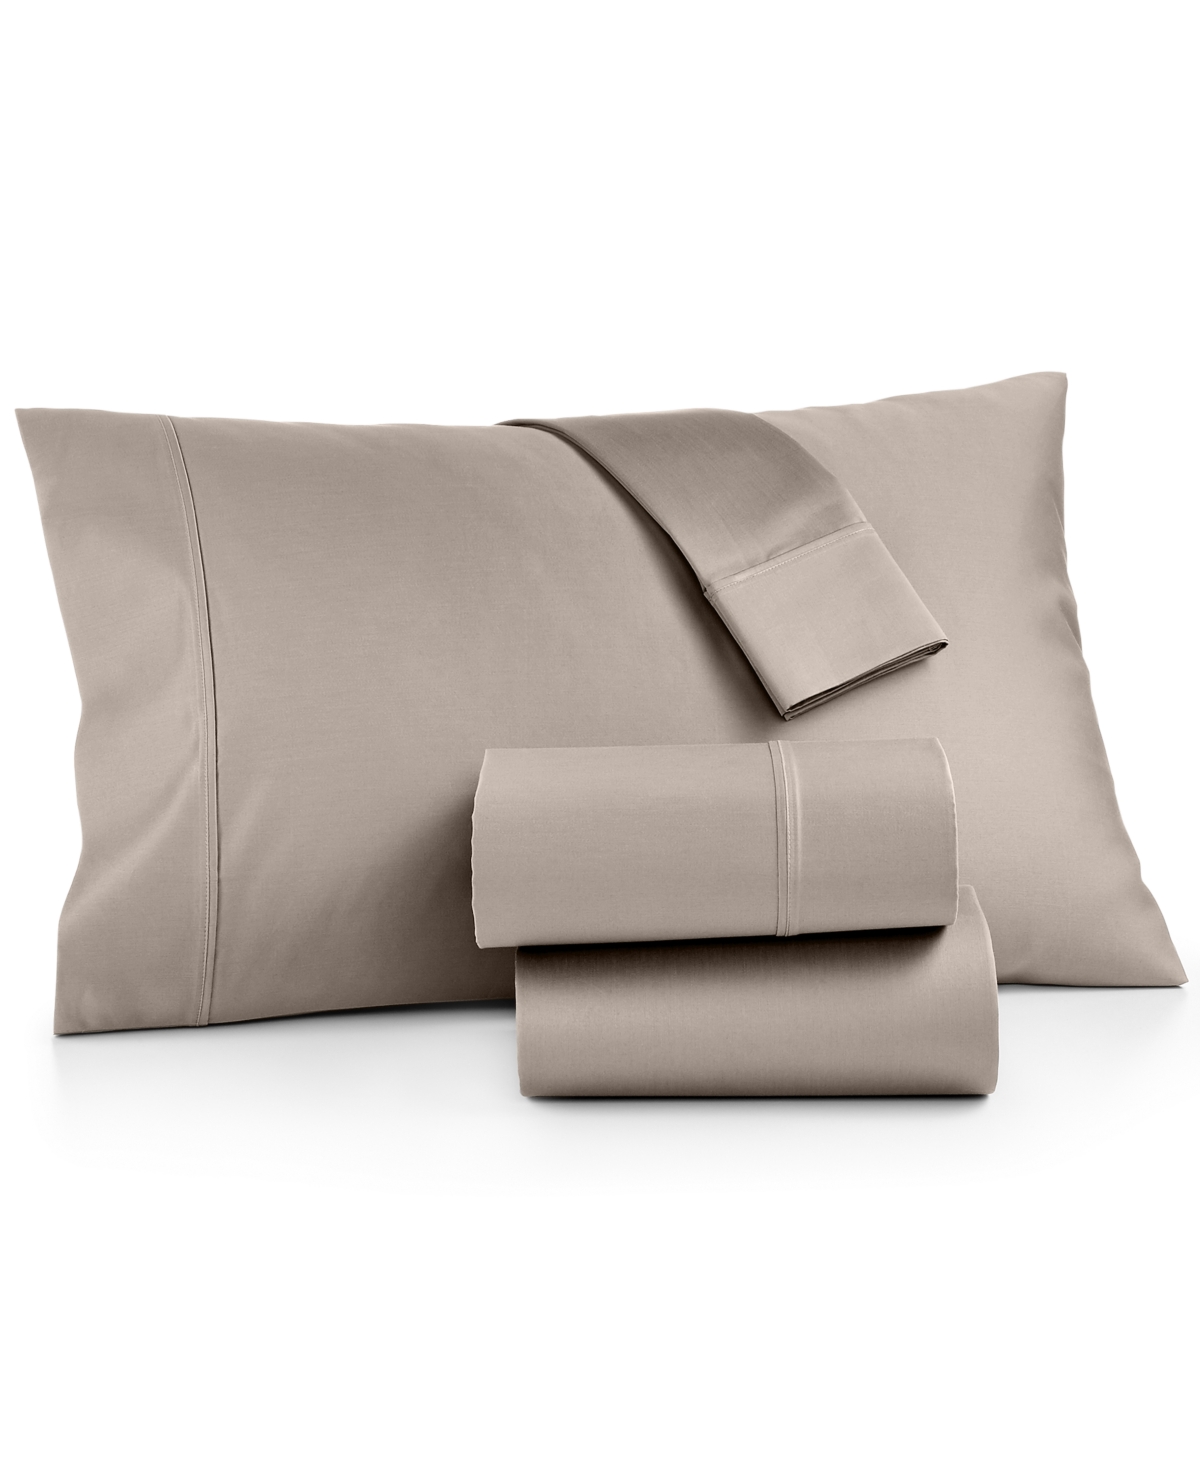 Aq Textiles Bergen House 100% Certified Egyptian Cotton 1000 Thread Count 4 Pc. Sheet Set, California King In Taupe